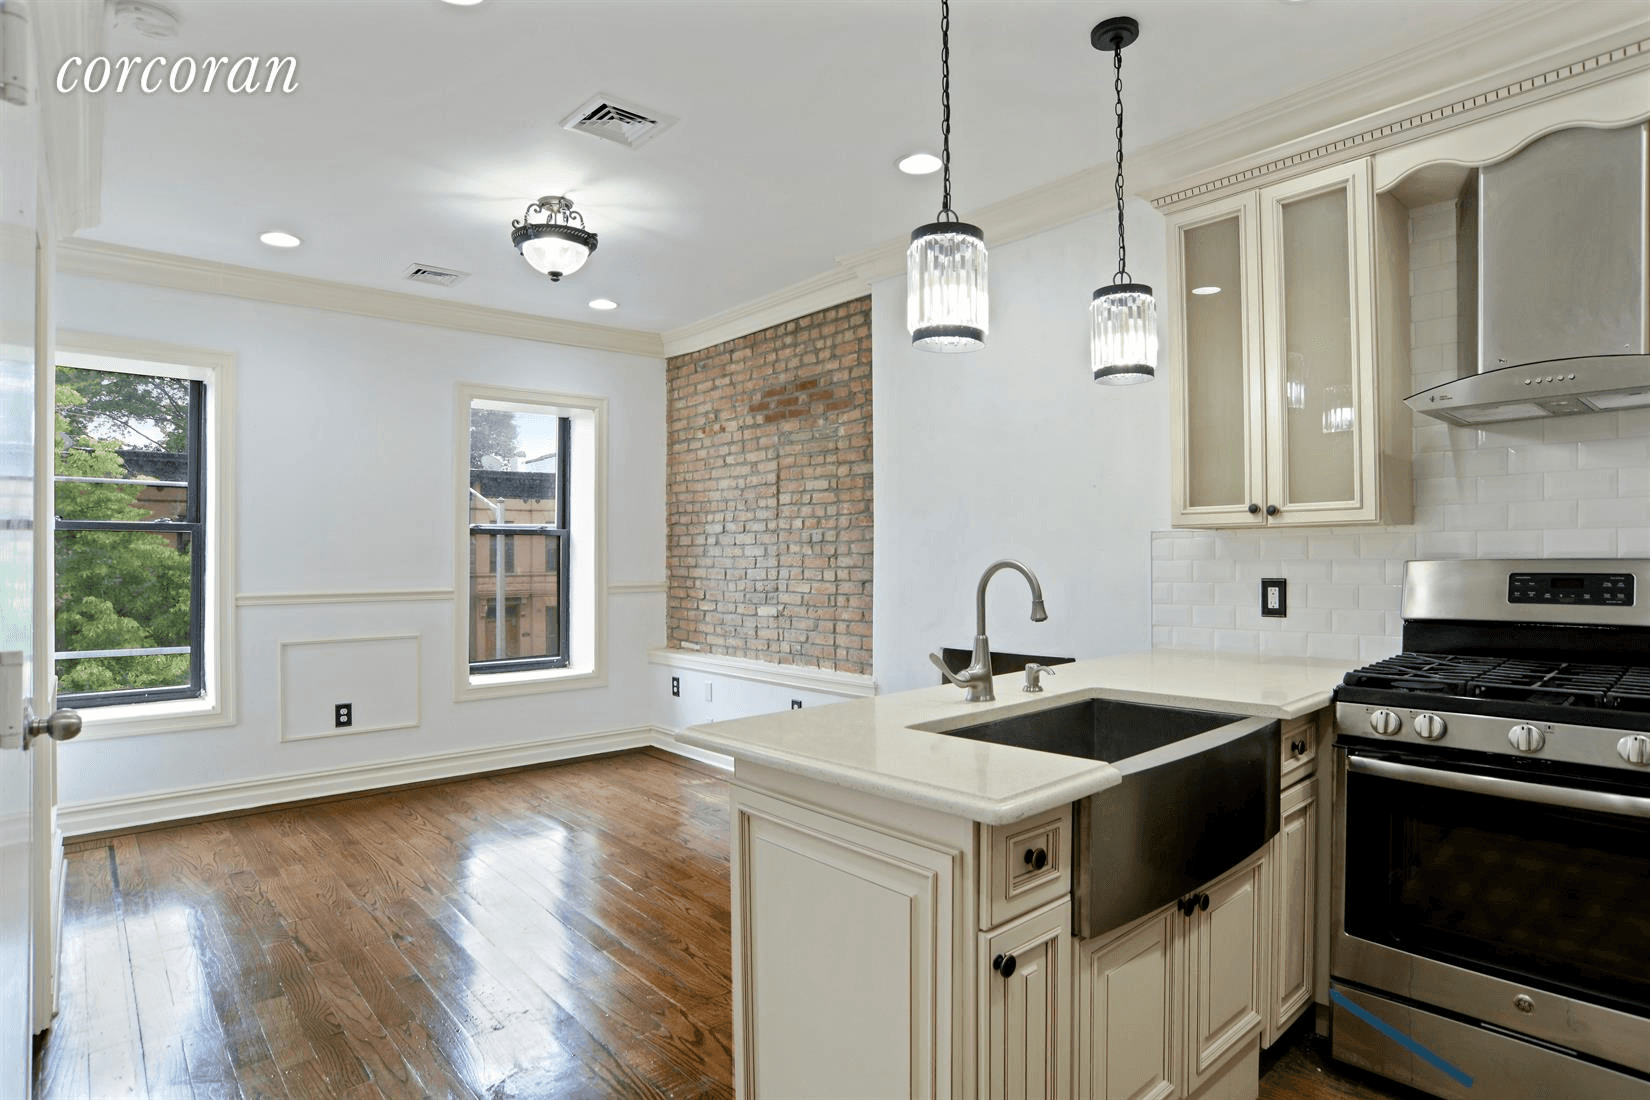 Welcome to 829 Putnam apt 2 a beautiful Parlor level apartment in a classic Brooklyn brownstone in historic Stuyvesant Heights.